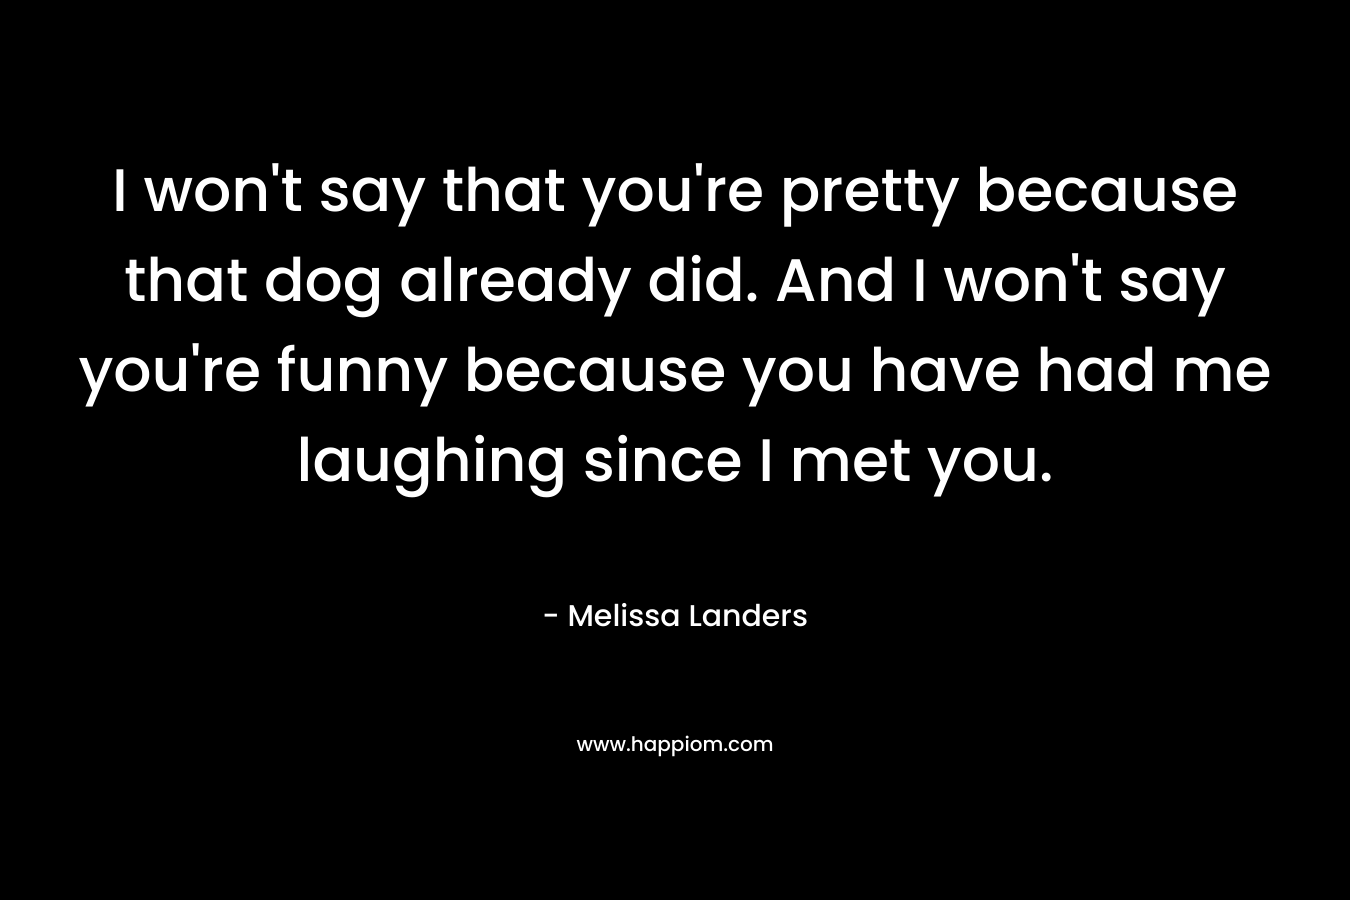 I won’t say that you’re pretty because that dog already did. And I won’t say you’re funny because you have had me laughing since I met you. – Melissa Landers